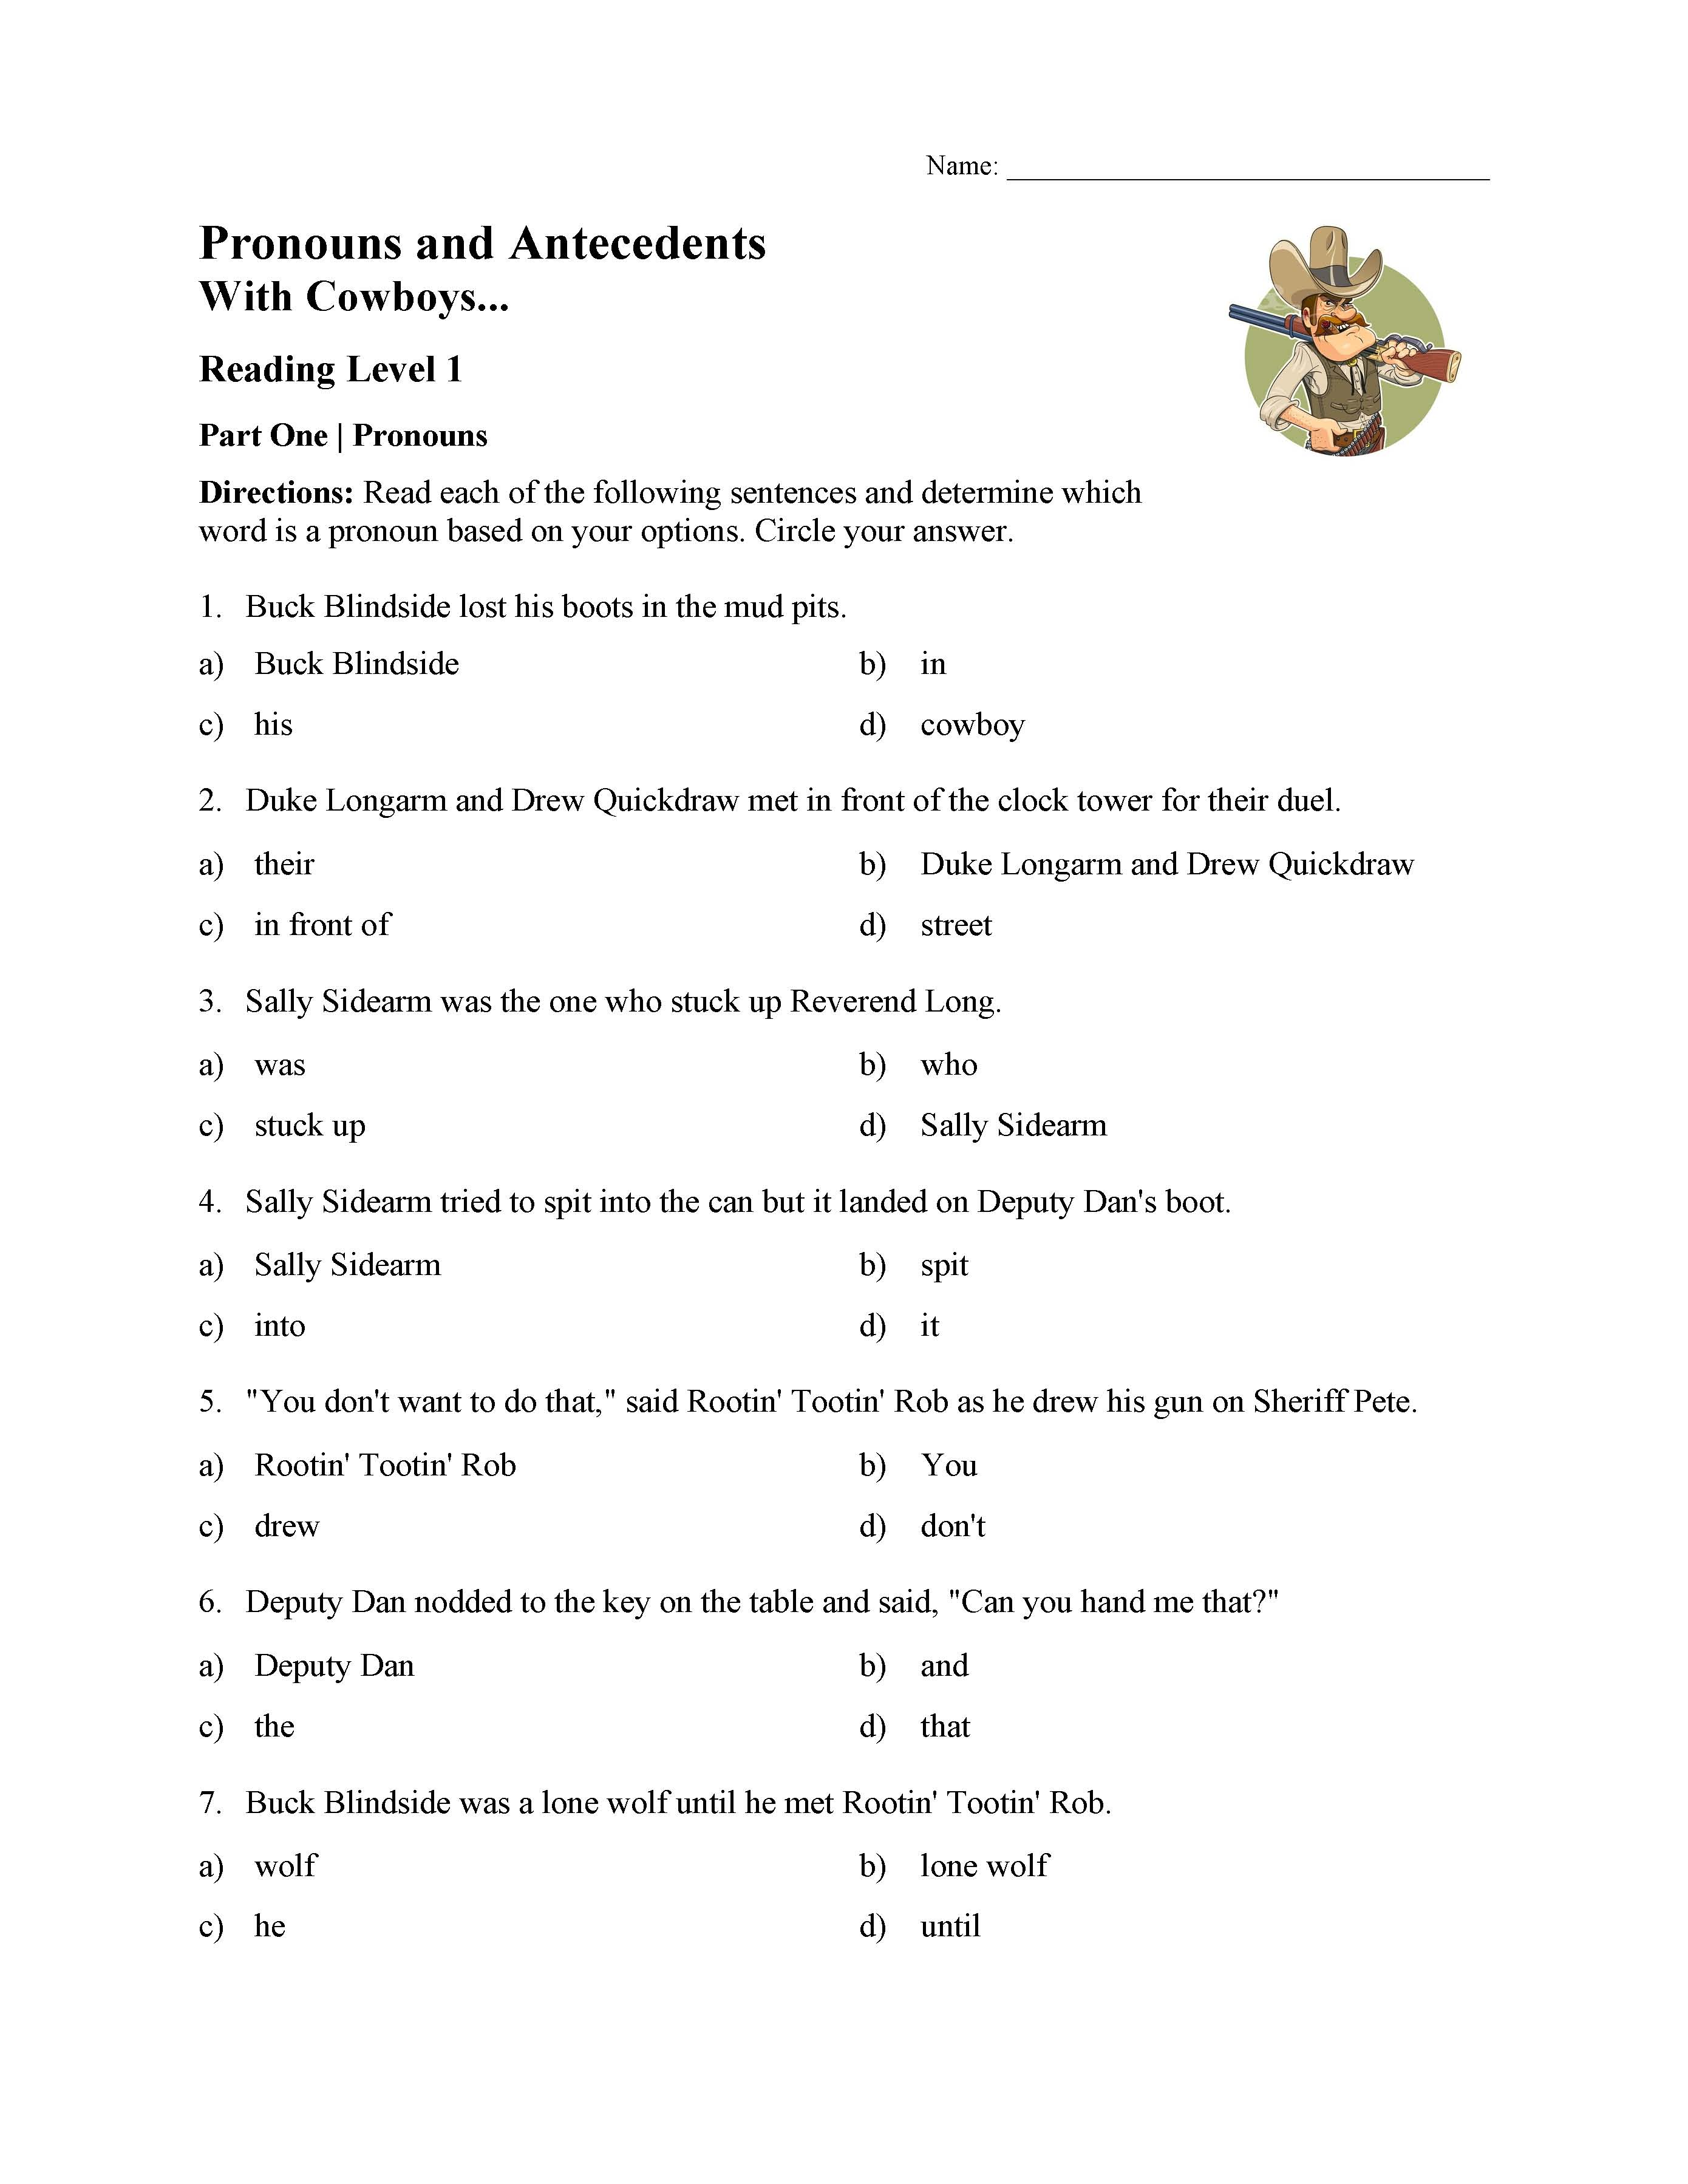 This is a preview image of the Pronoun and Antecedent Test - With Cowboys | Reading Level 1.